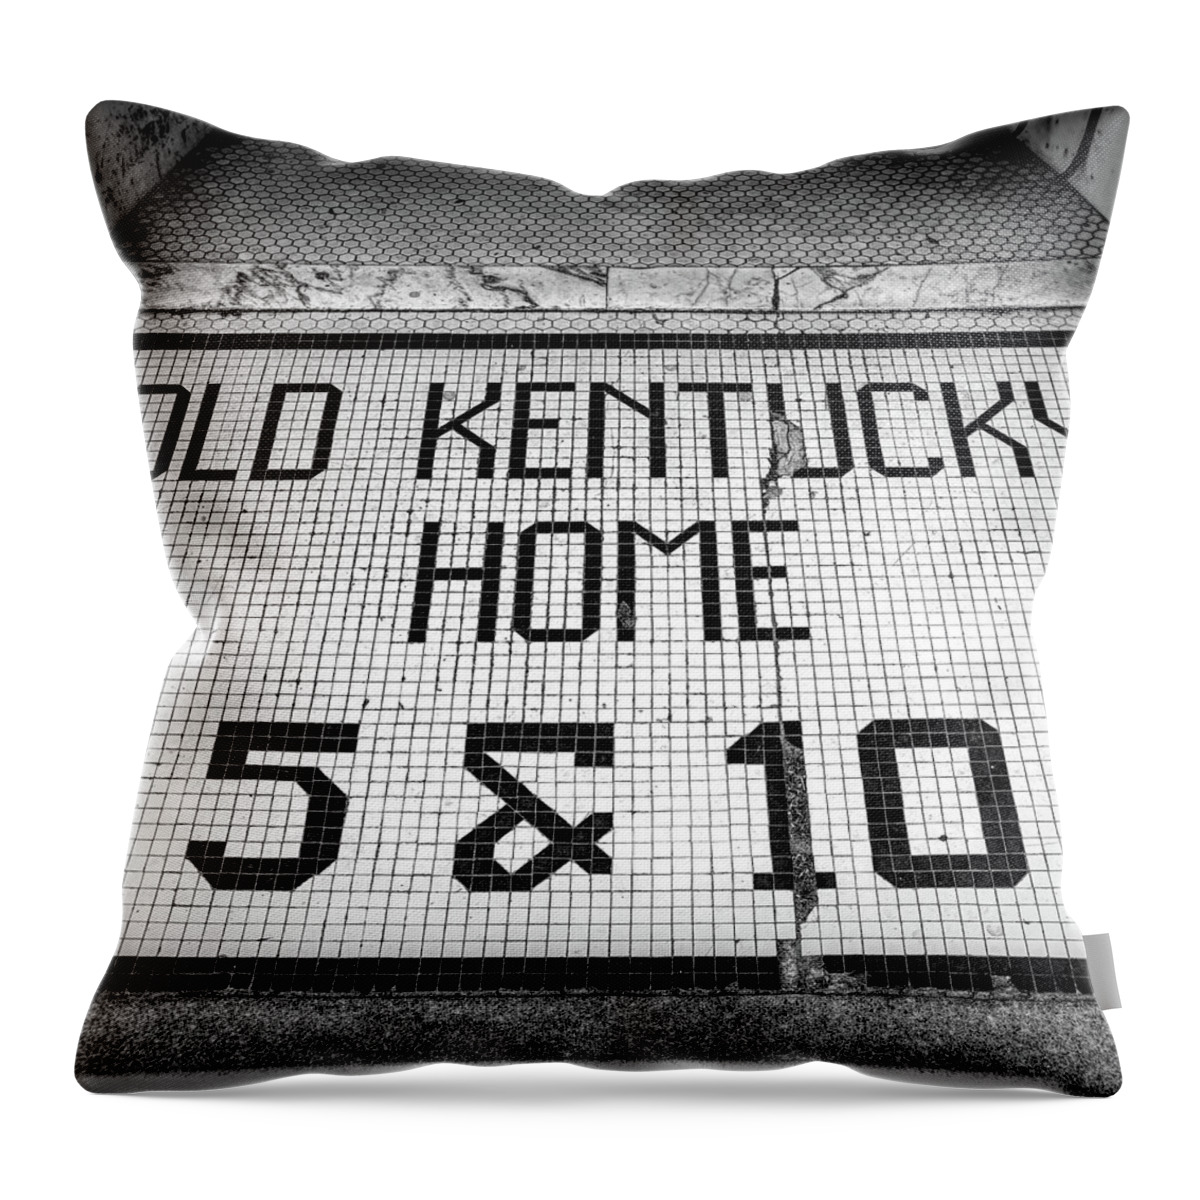 Old Kentucky Home Throw Pillow featuring the photograph Old Kentucky Home by Sharon Popek